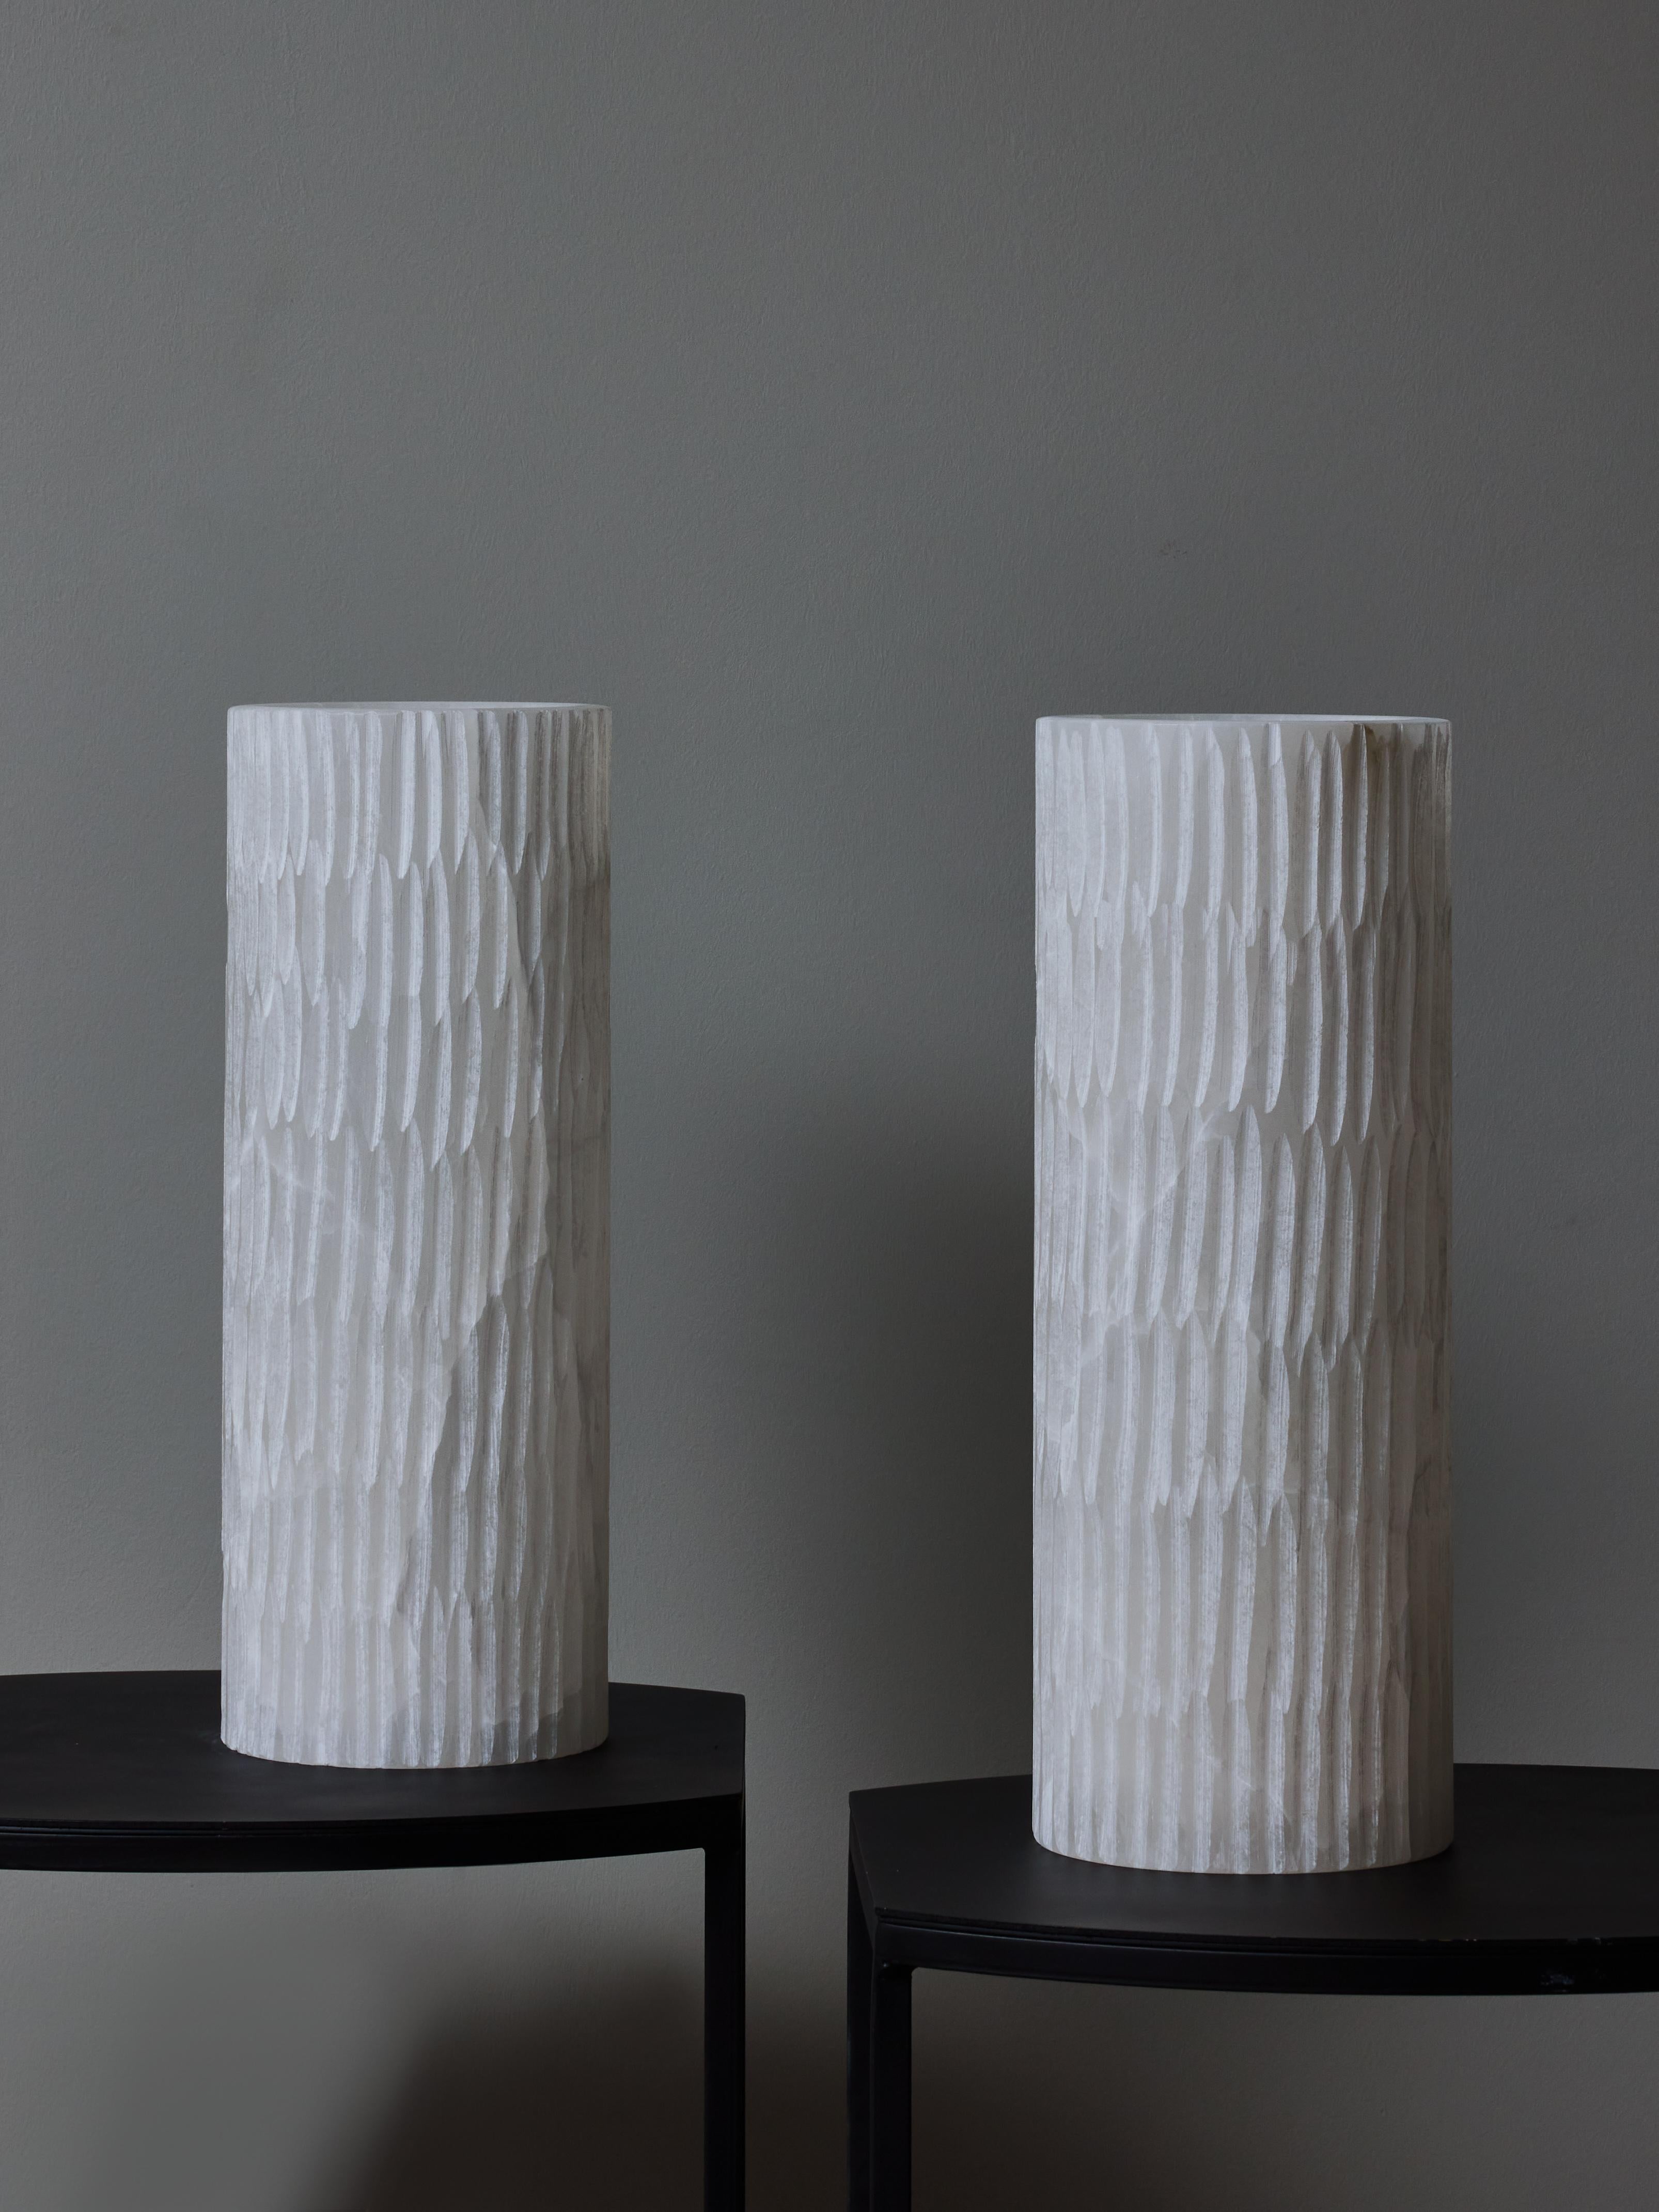 Pair of table lamps made of a single cylindrical piece of alabaster with notch decors all over.